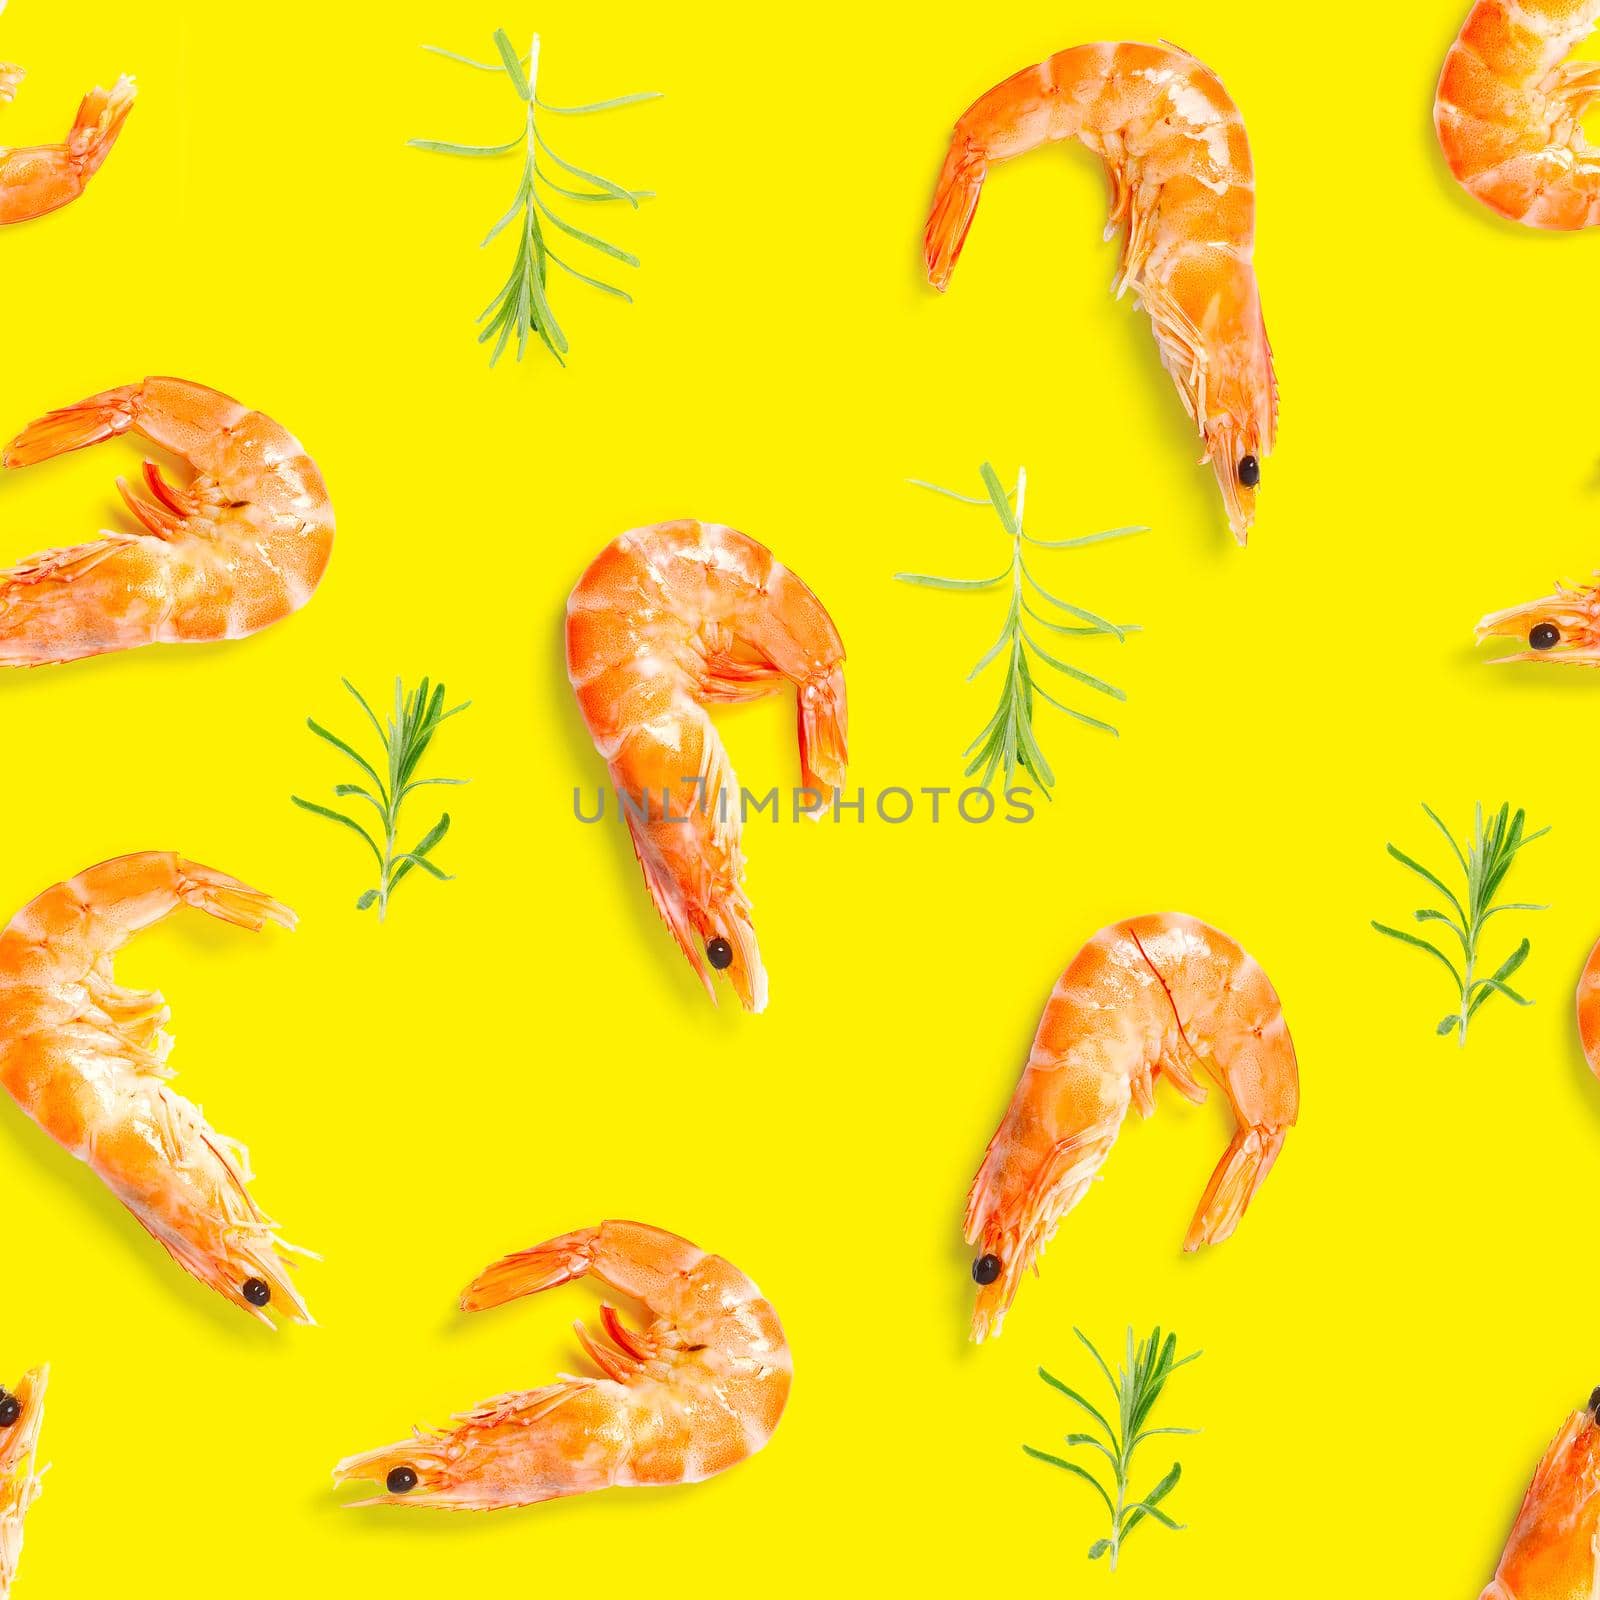 Tiger shrimp. Seamless pattern made from Prawn isolated on a yellow background. Seafood seamless pattern with shrimps. seafood pattern by PhotoTime